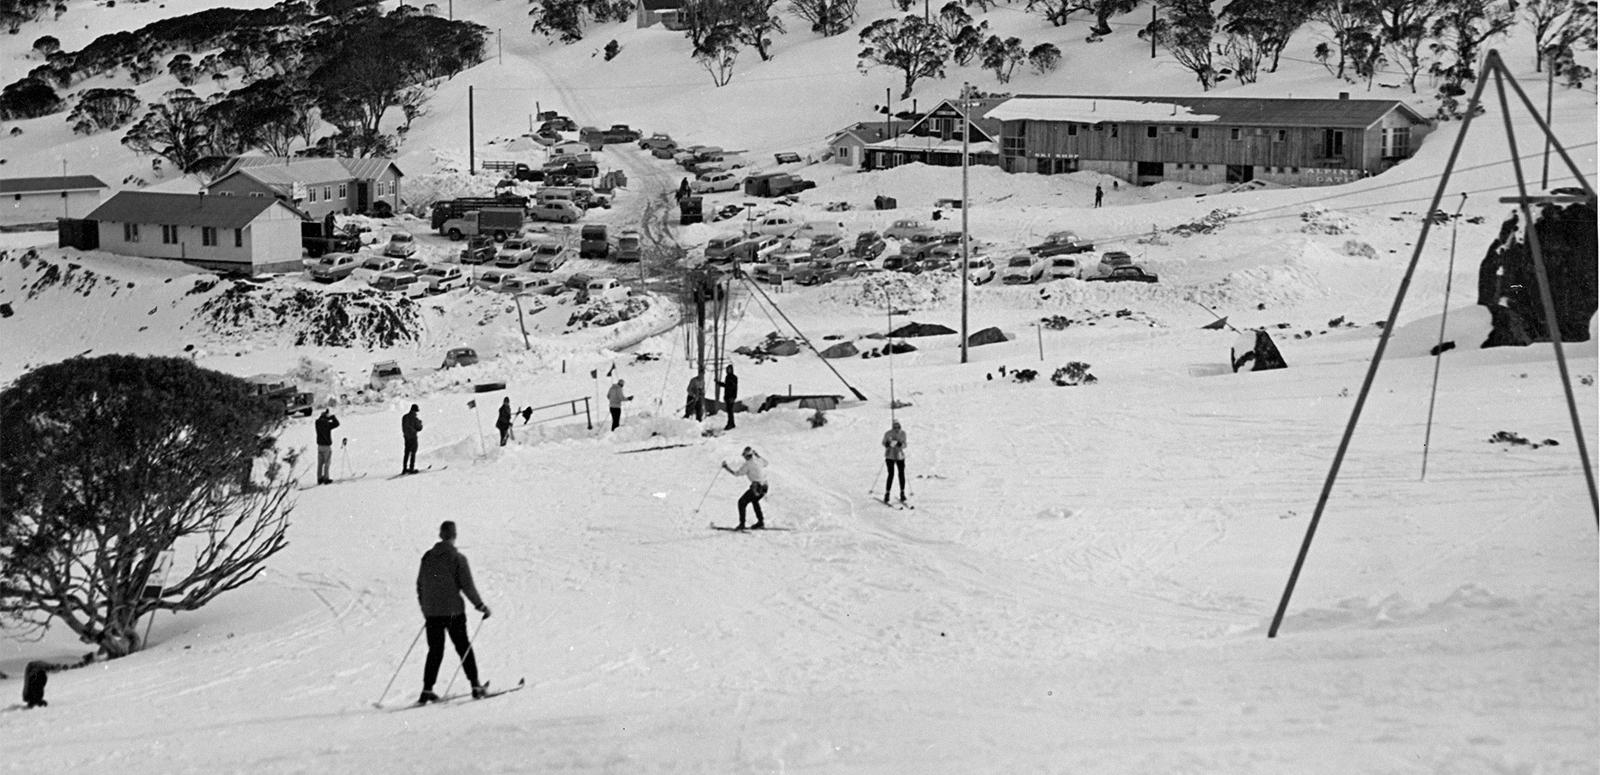 Skiers skiing down a slope in the early 1960s